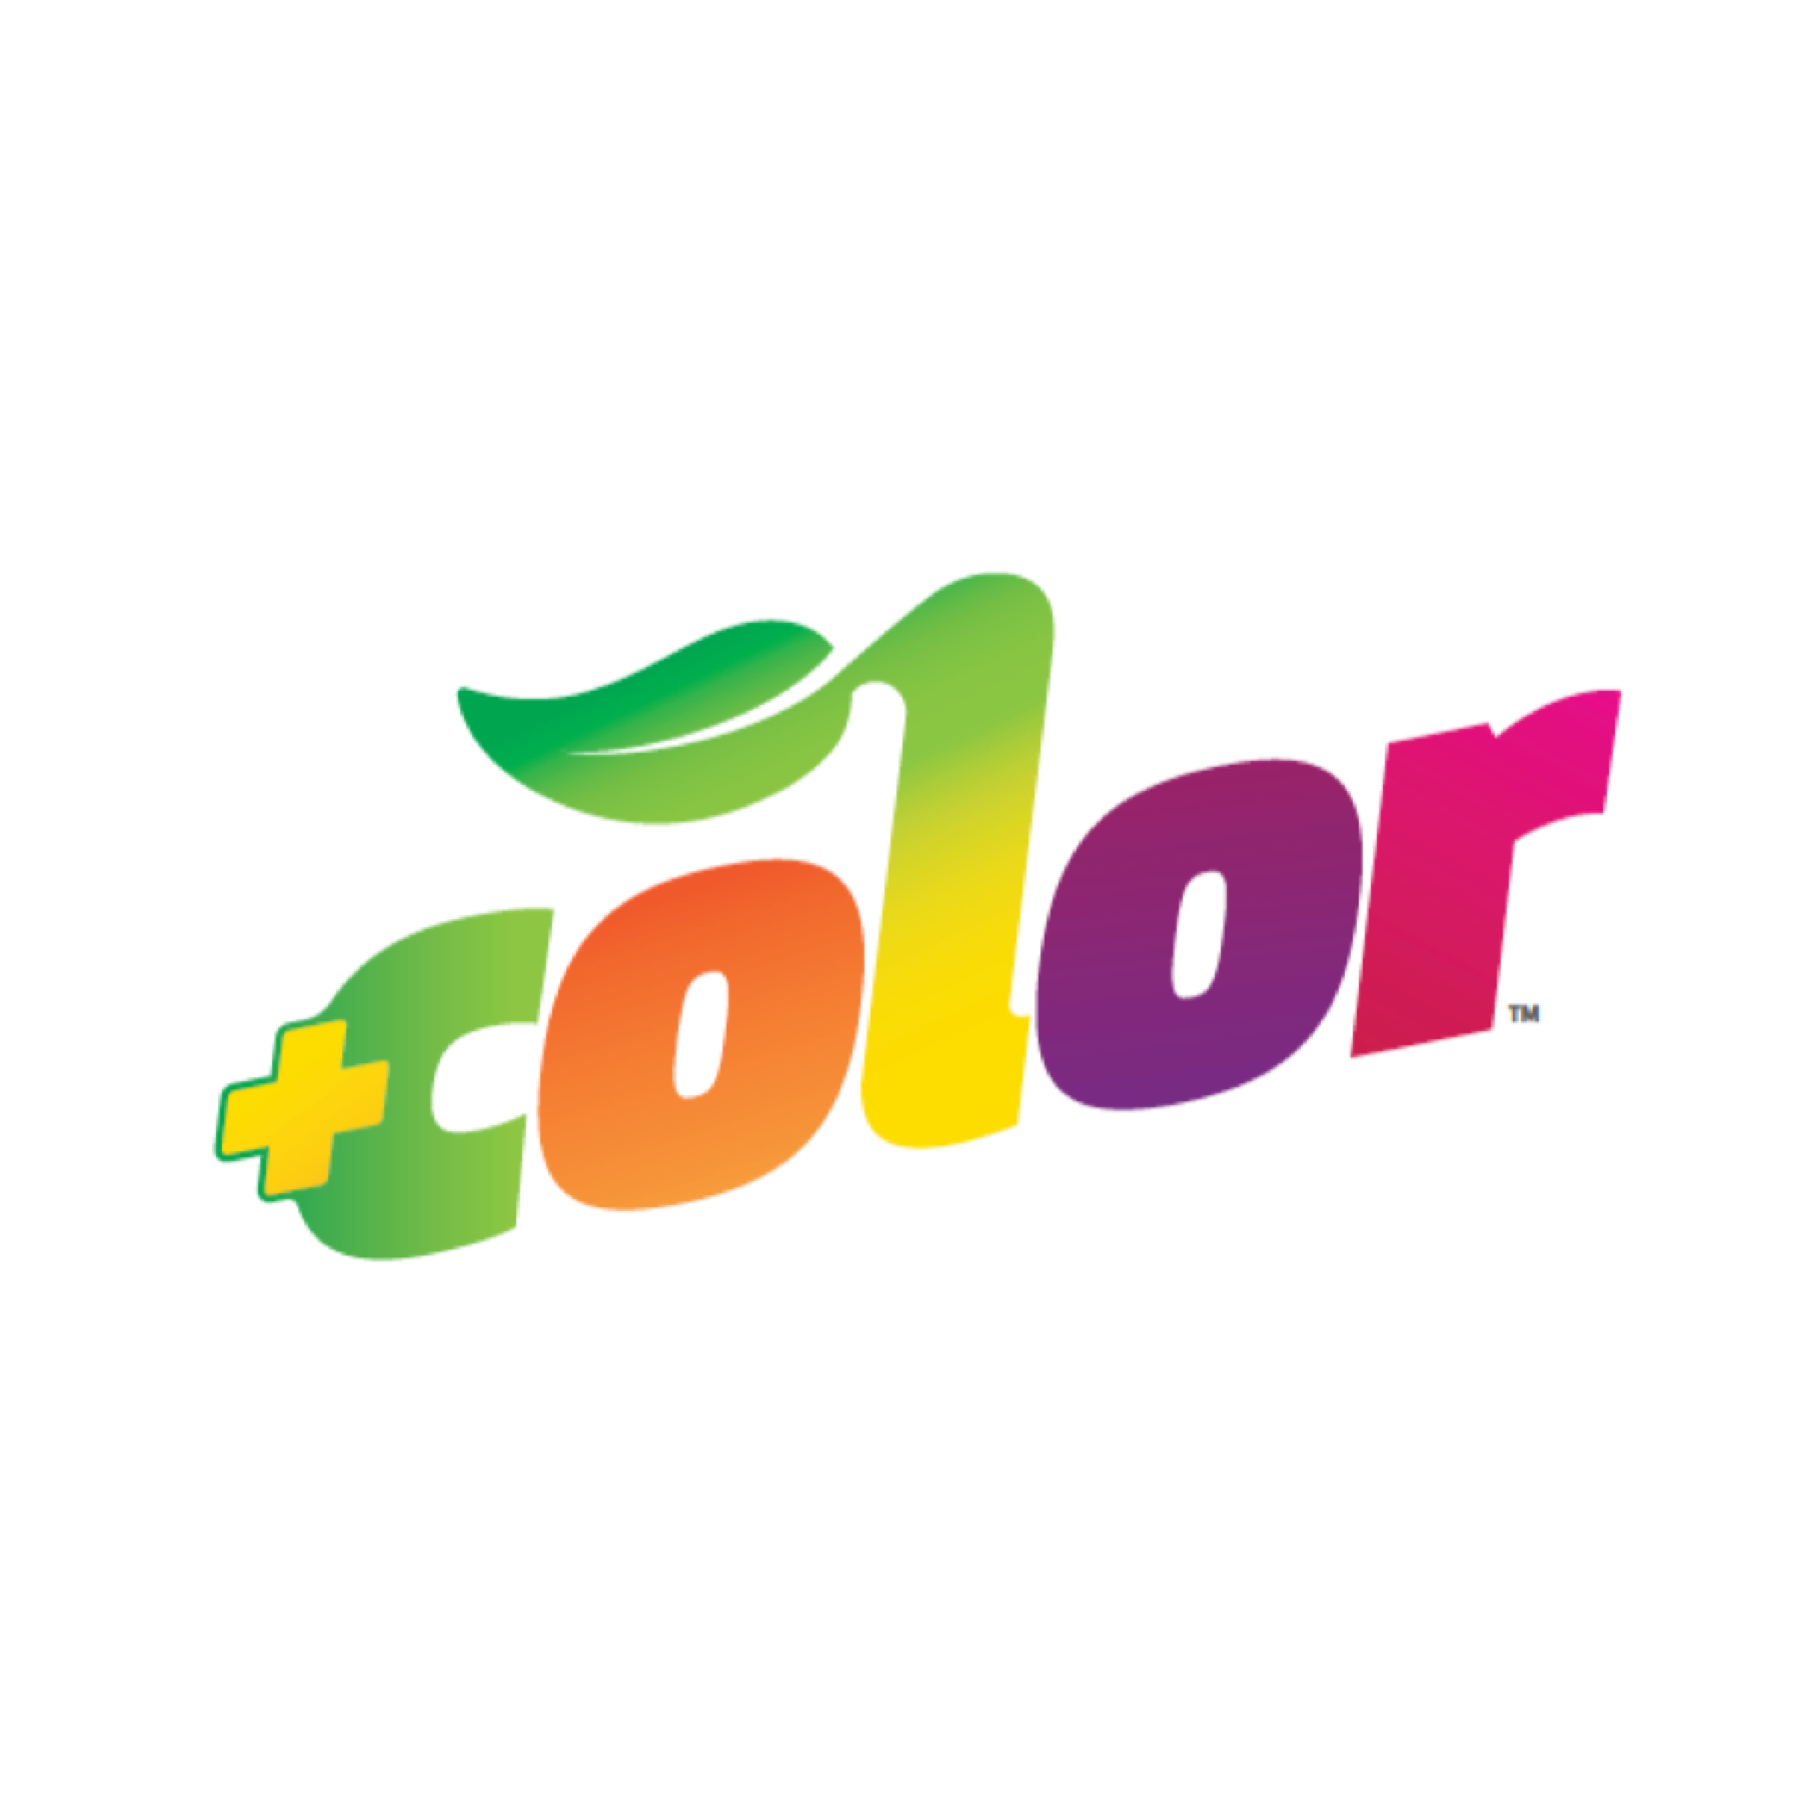 Main Image For Category Add Color - Like Button (1805x1806)